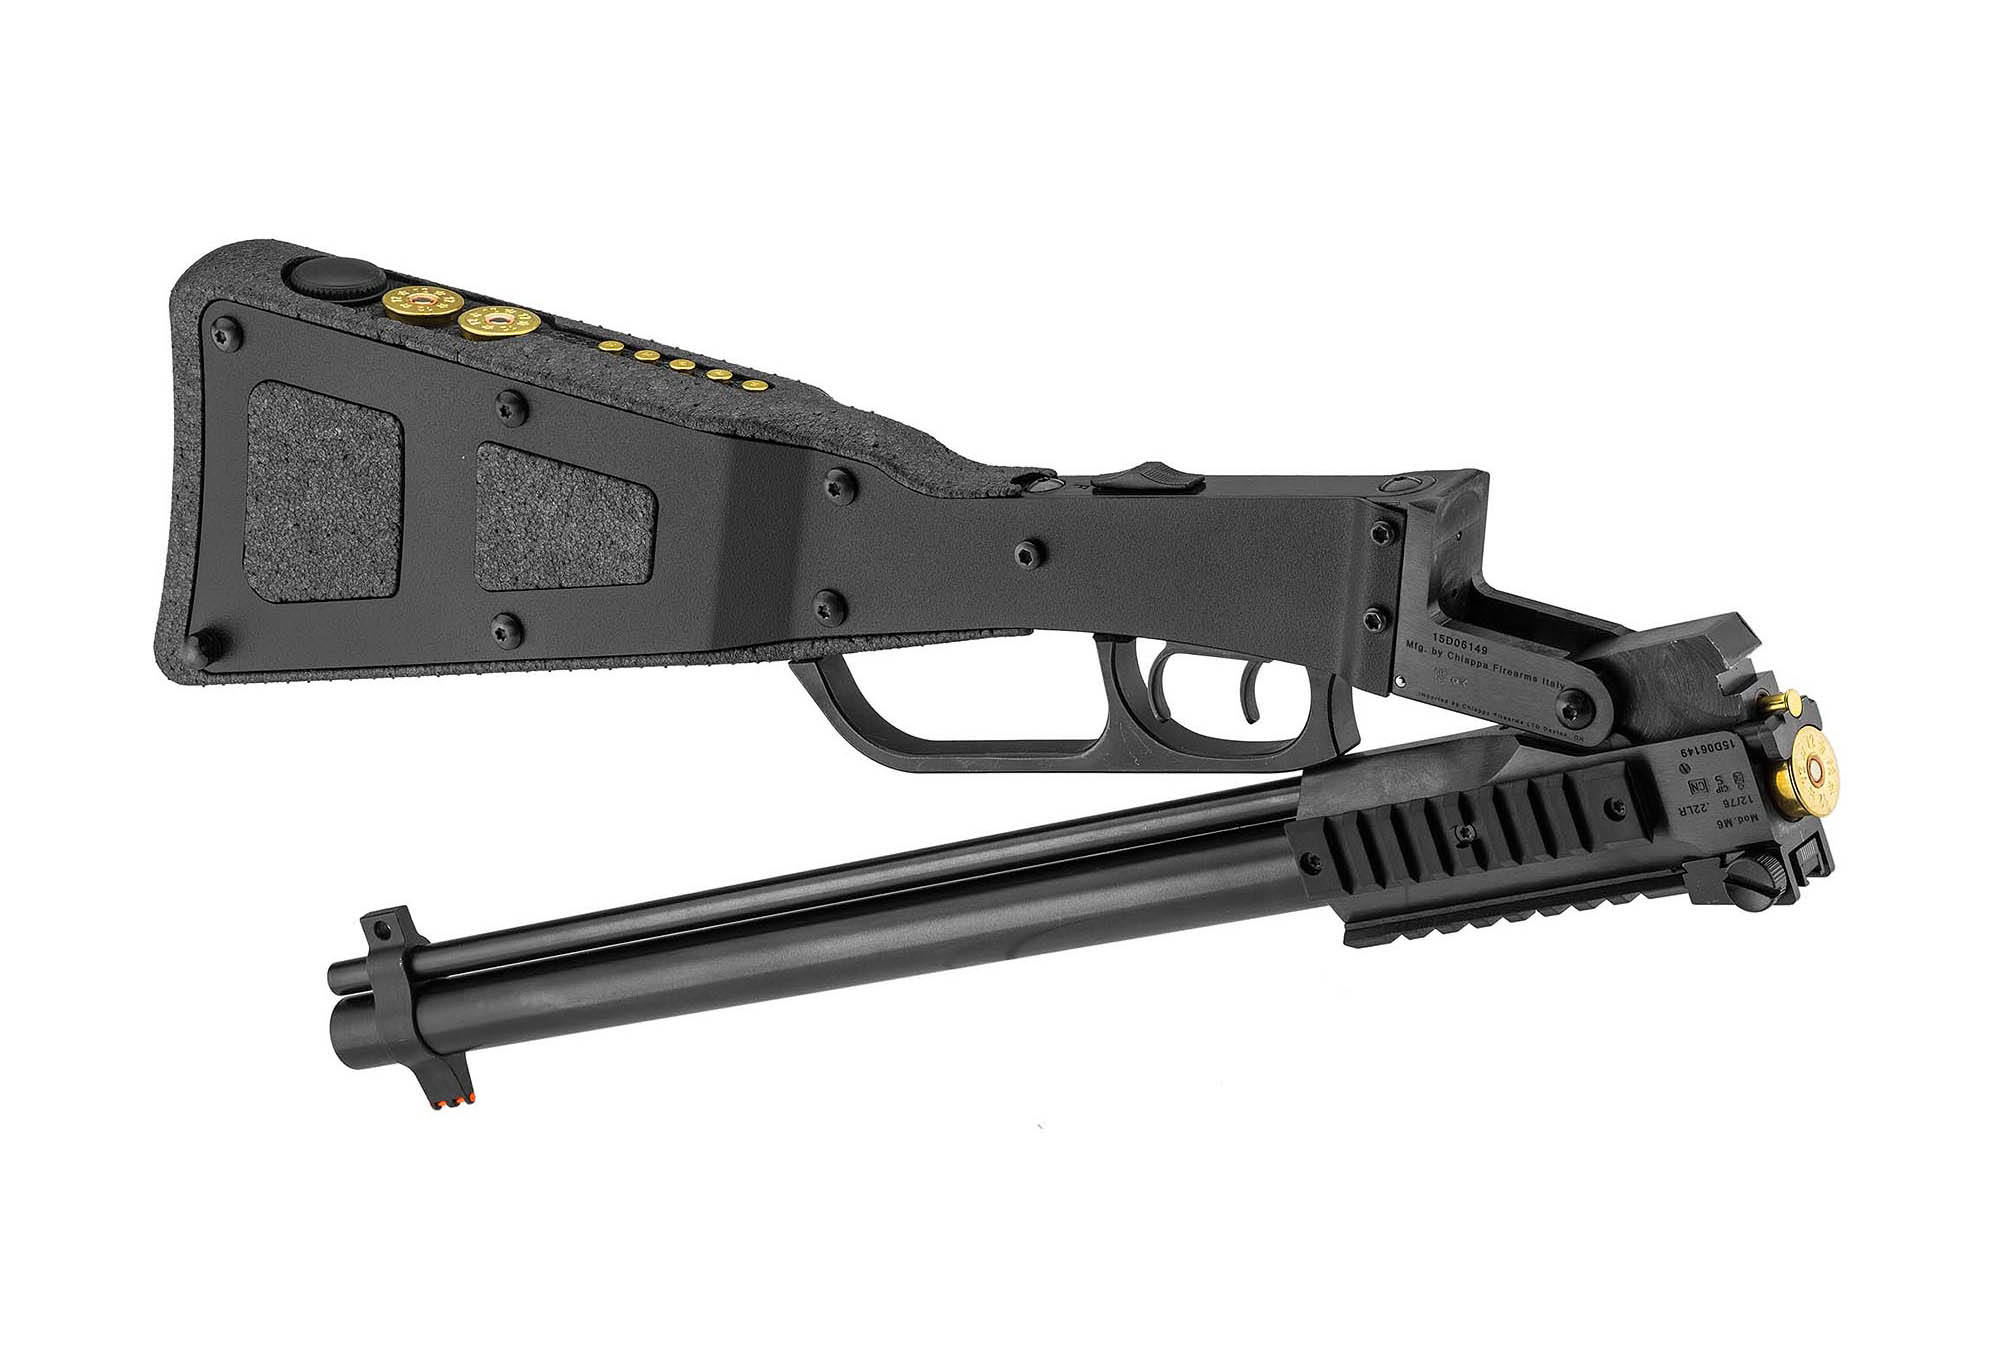 Chiappa Firearms M6 X-Caliber: the survival rifle coming from the sky